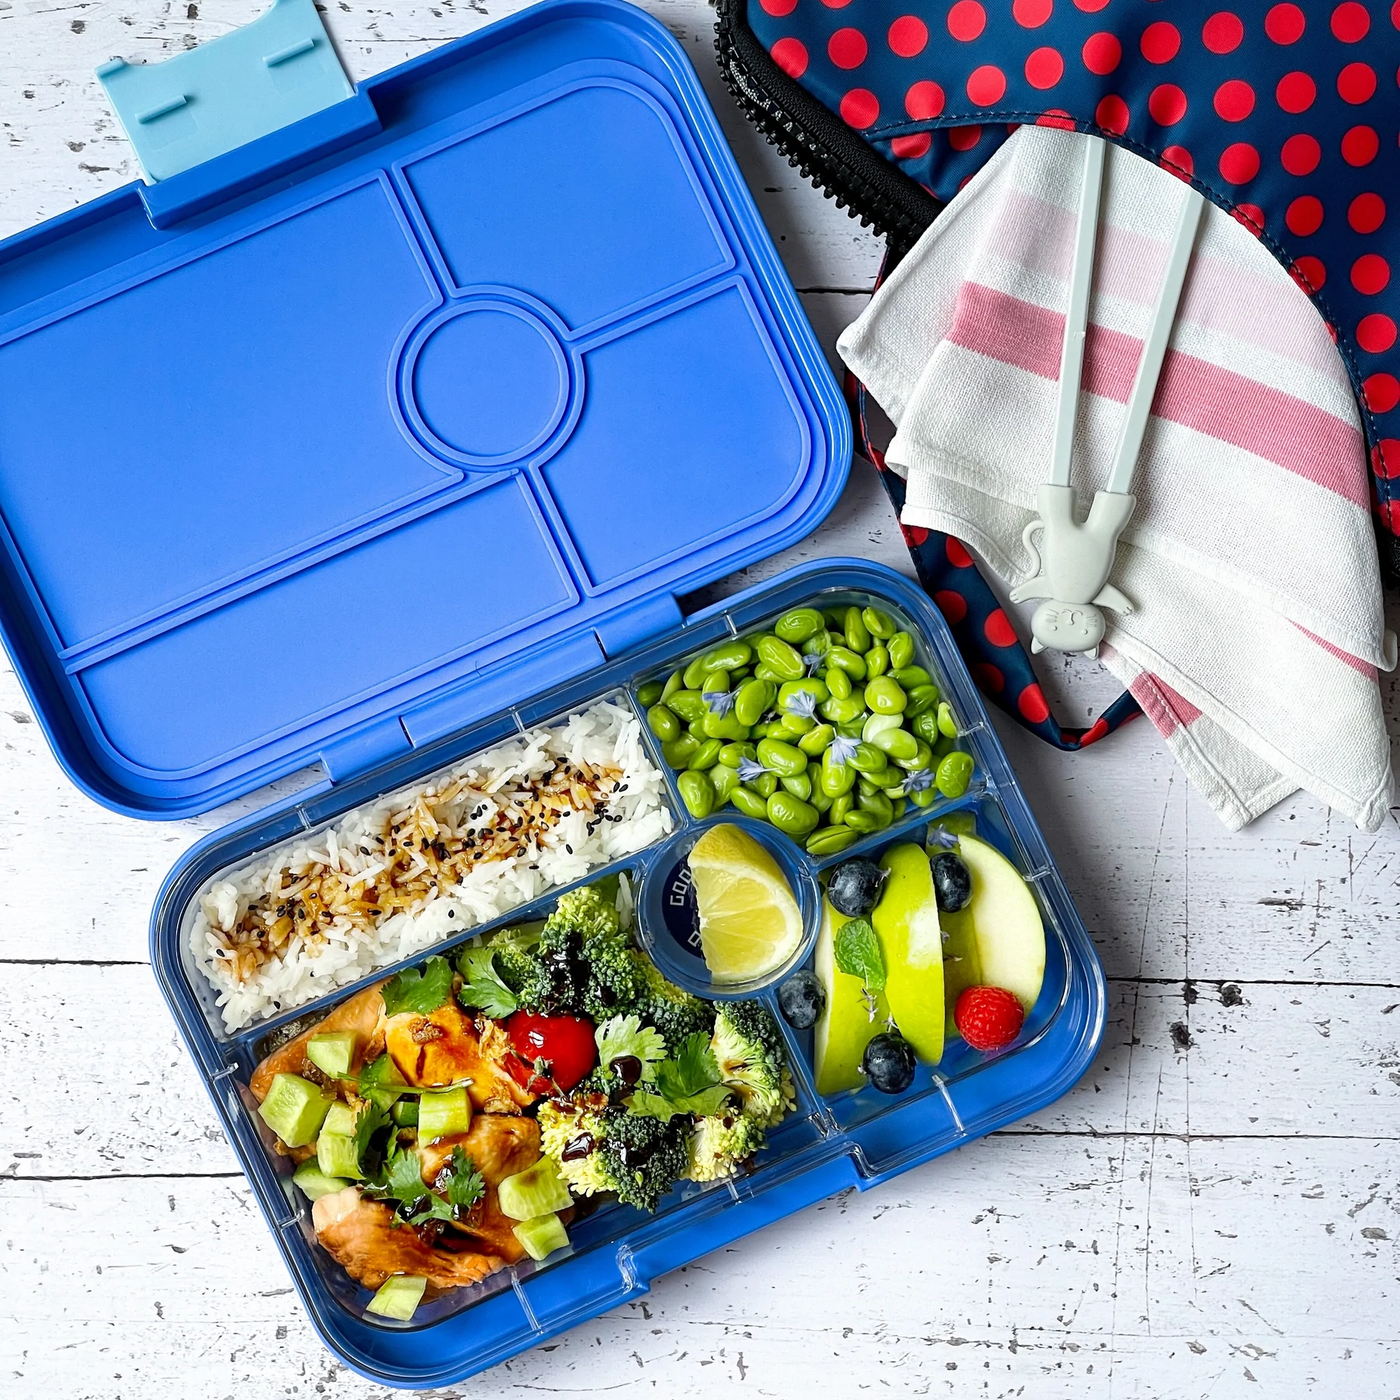 YumBox Tapas 5-Compartment Tray: True Blue (Space Tray)